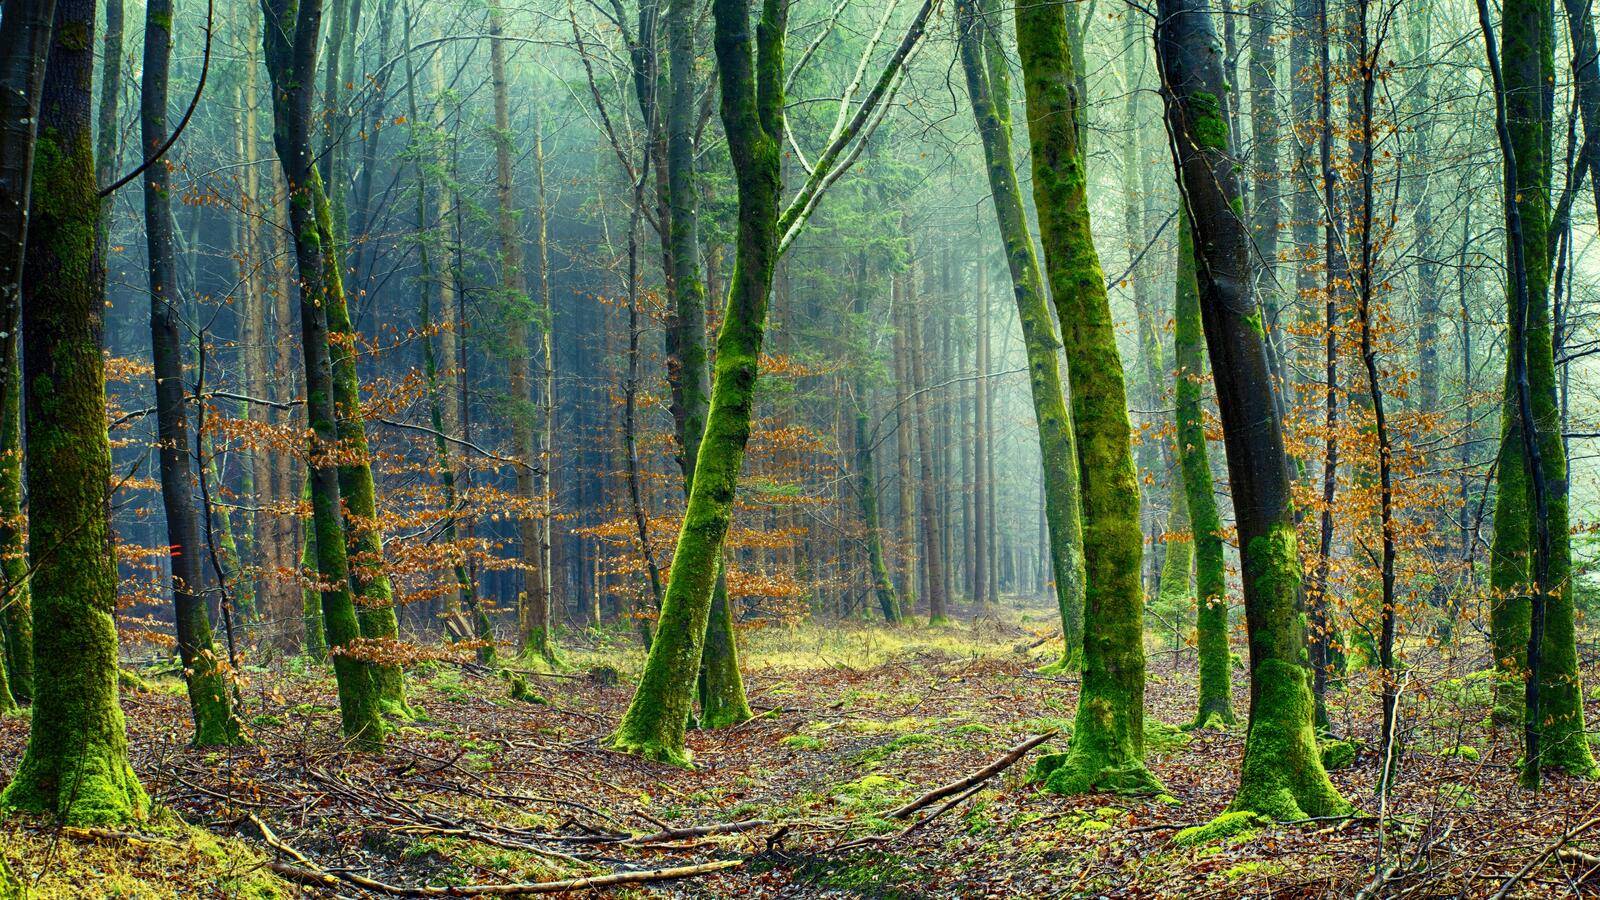 Wallpapers mood environment nature on the desktop